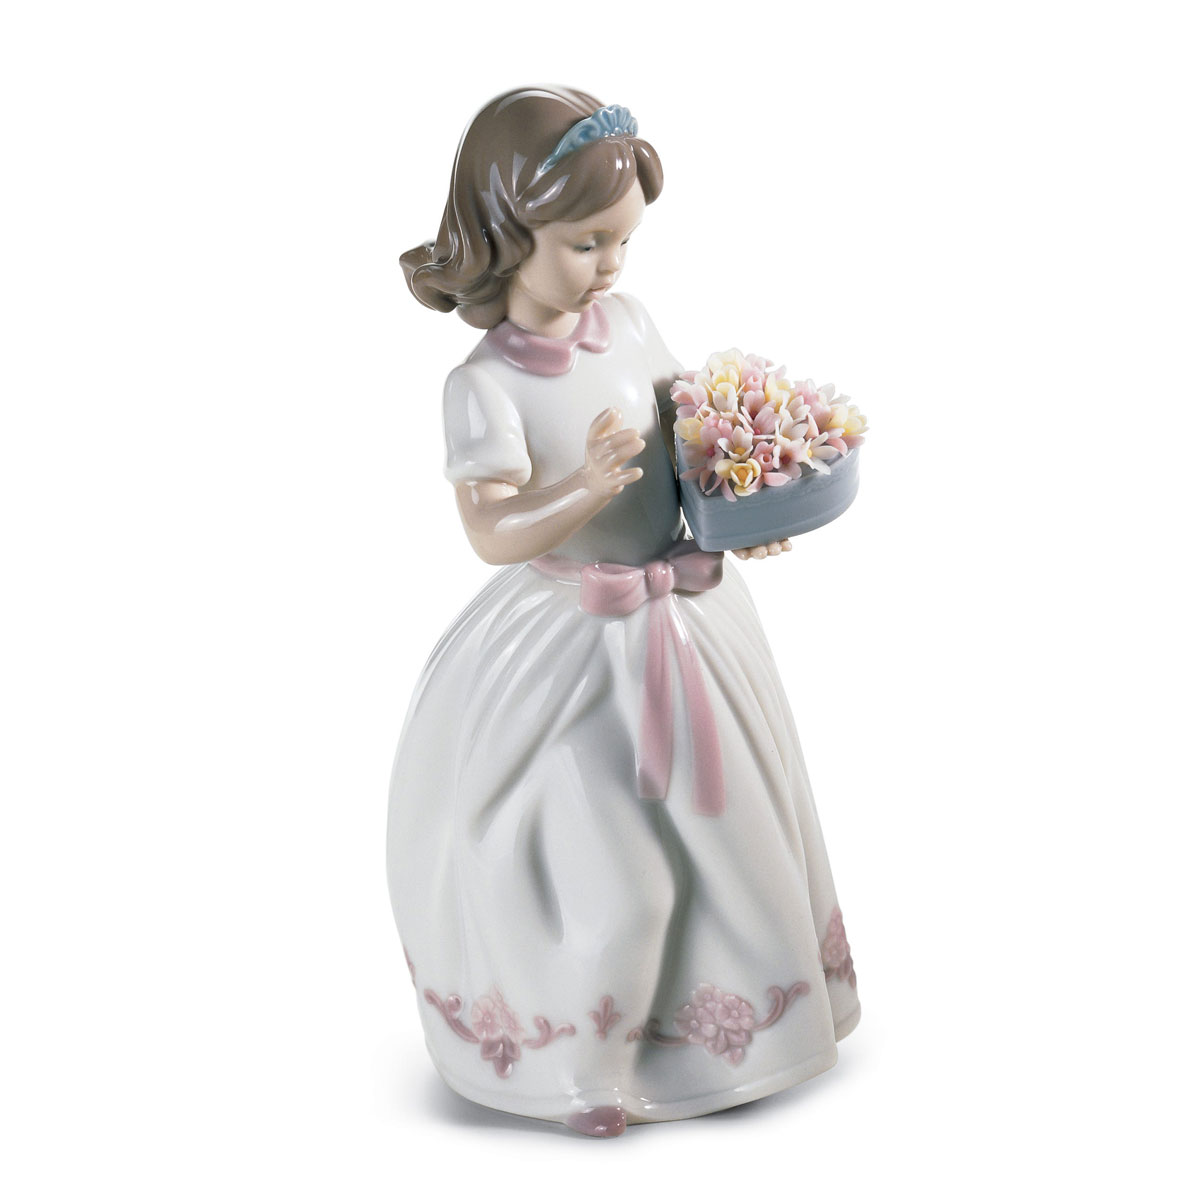 Lladro Classic Sculpture, For A Special Someone Girl Figurine